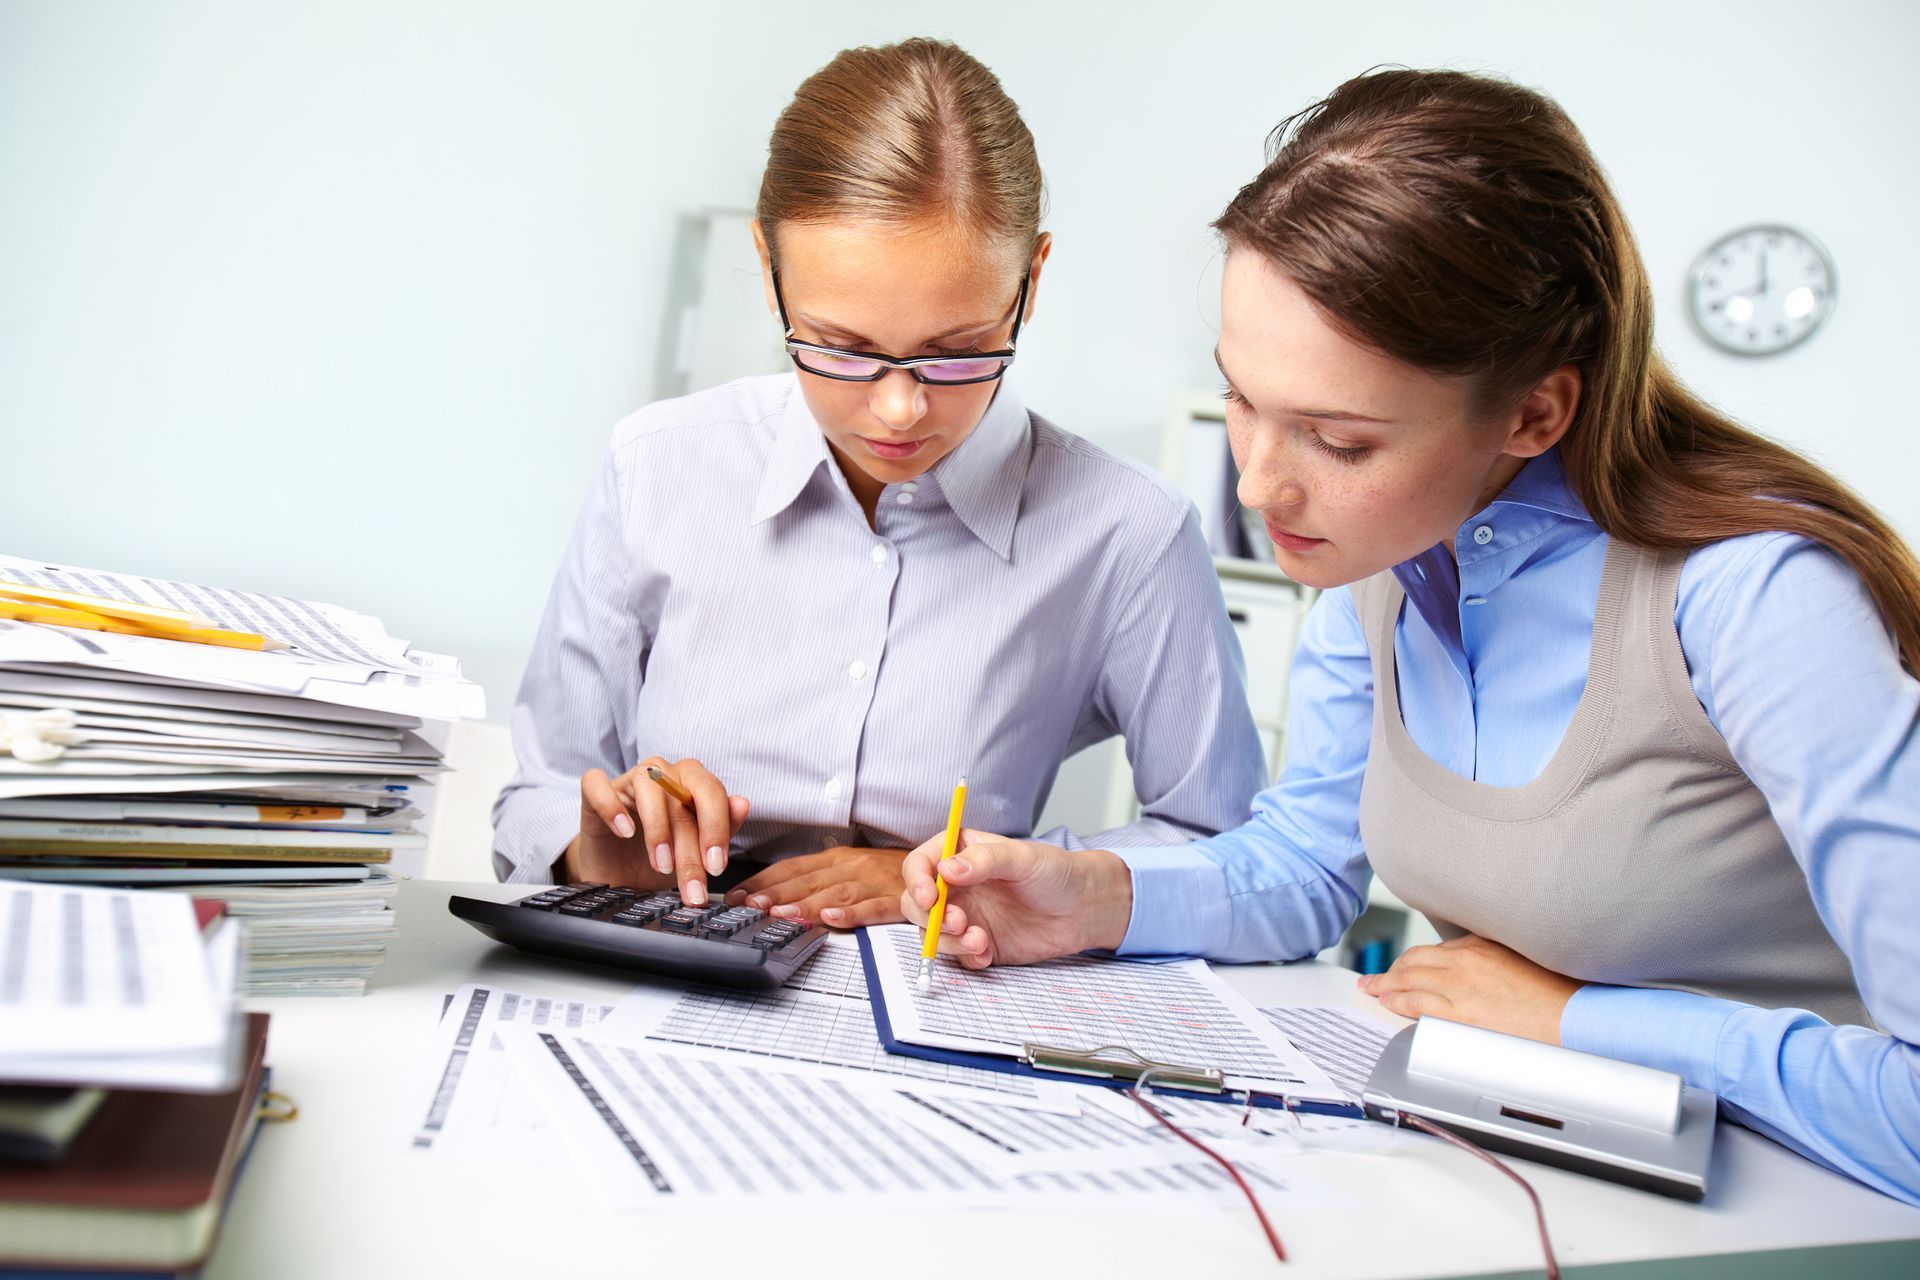 two women are sitting at a desk with papers and a calculator .